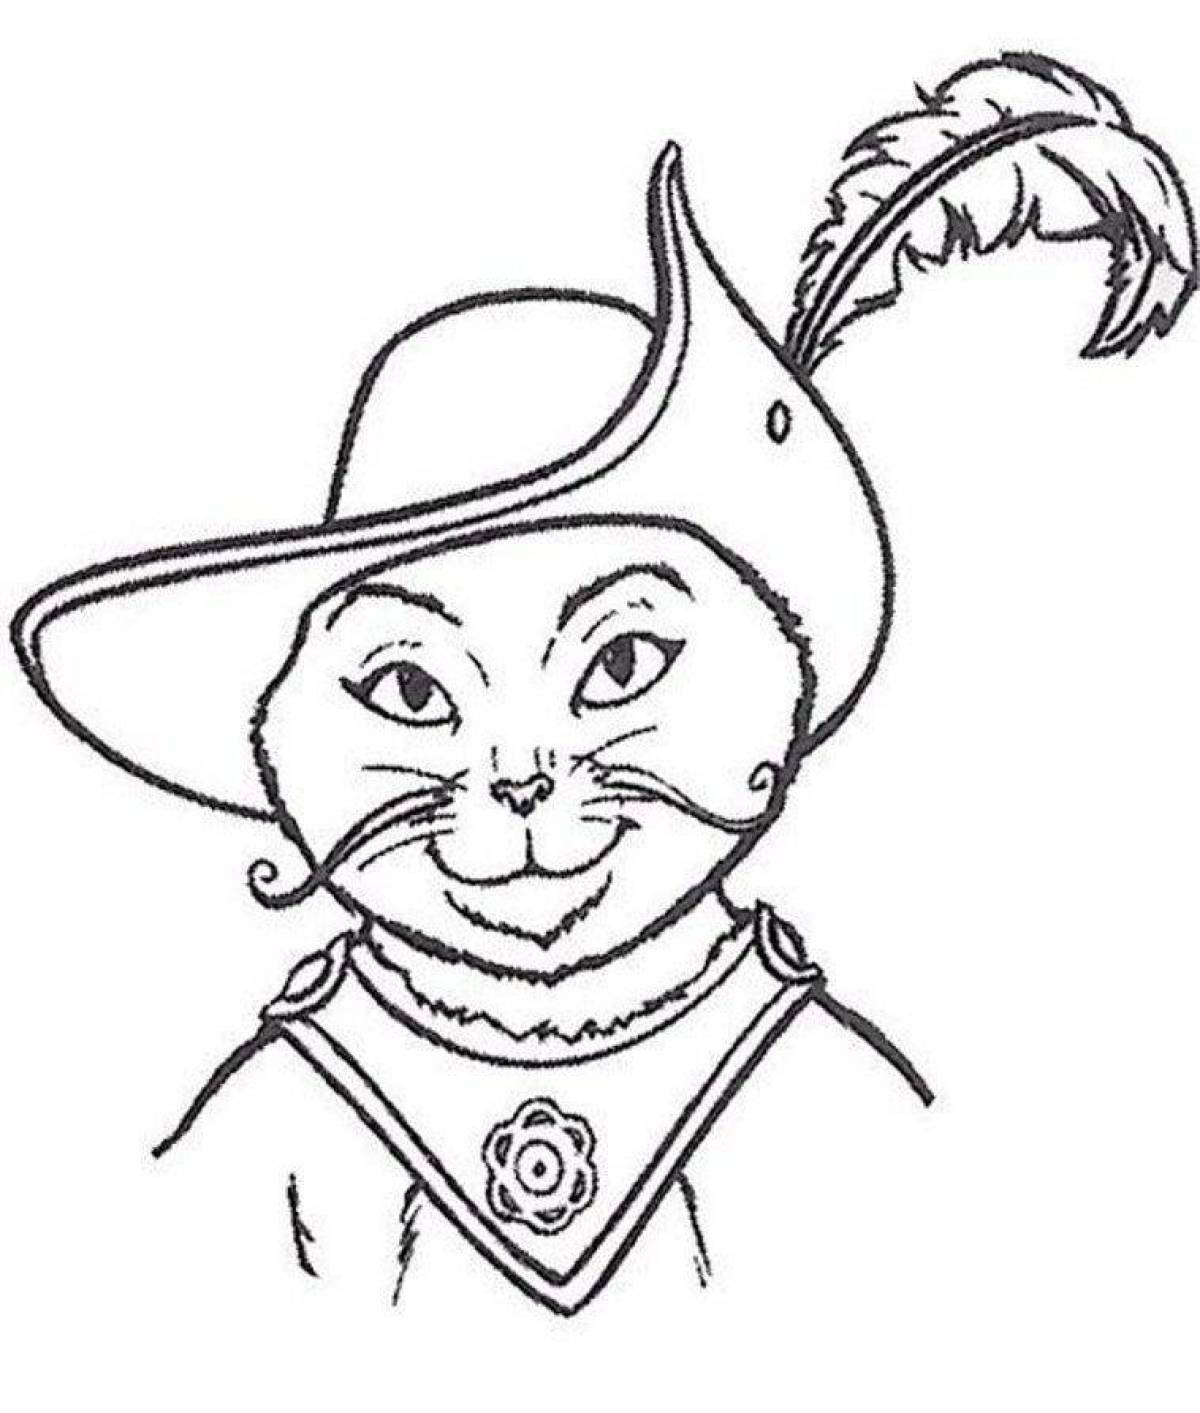 Live Puss in Boots coloring book for kids